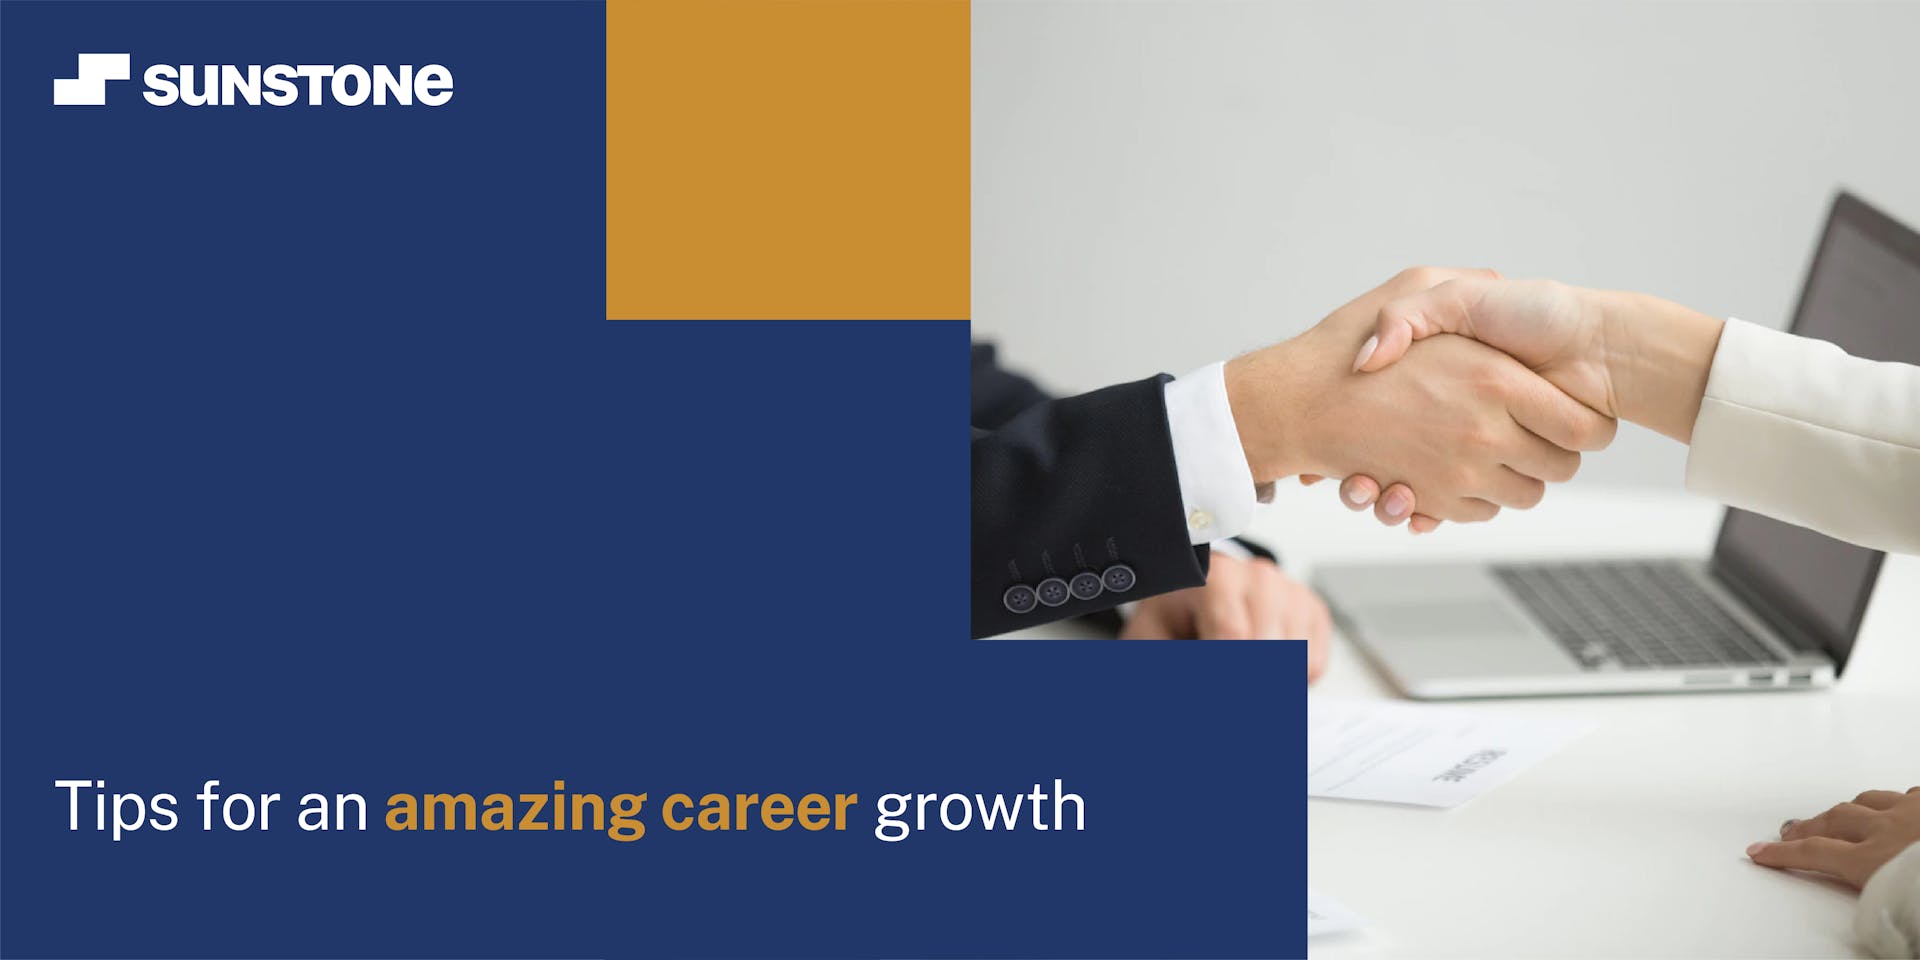 Tips for an amazing career growth